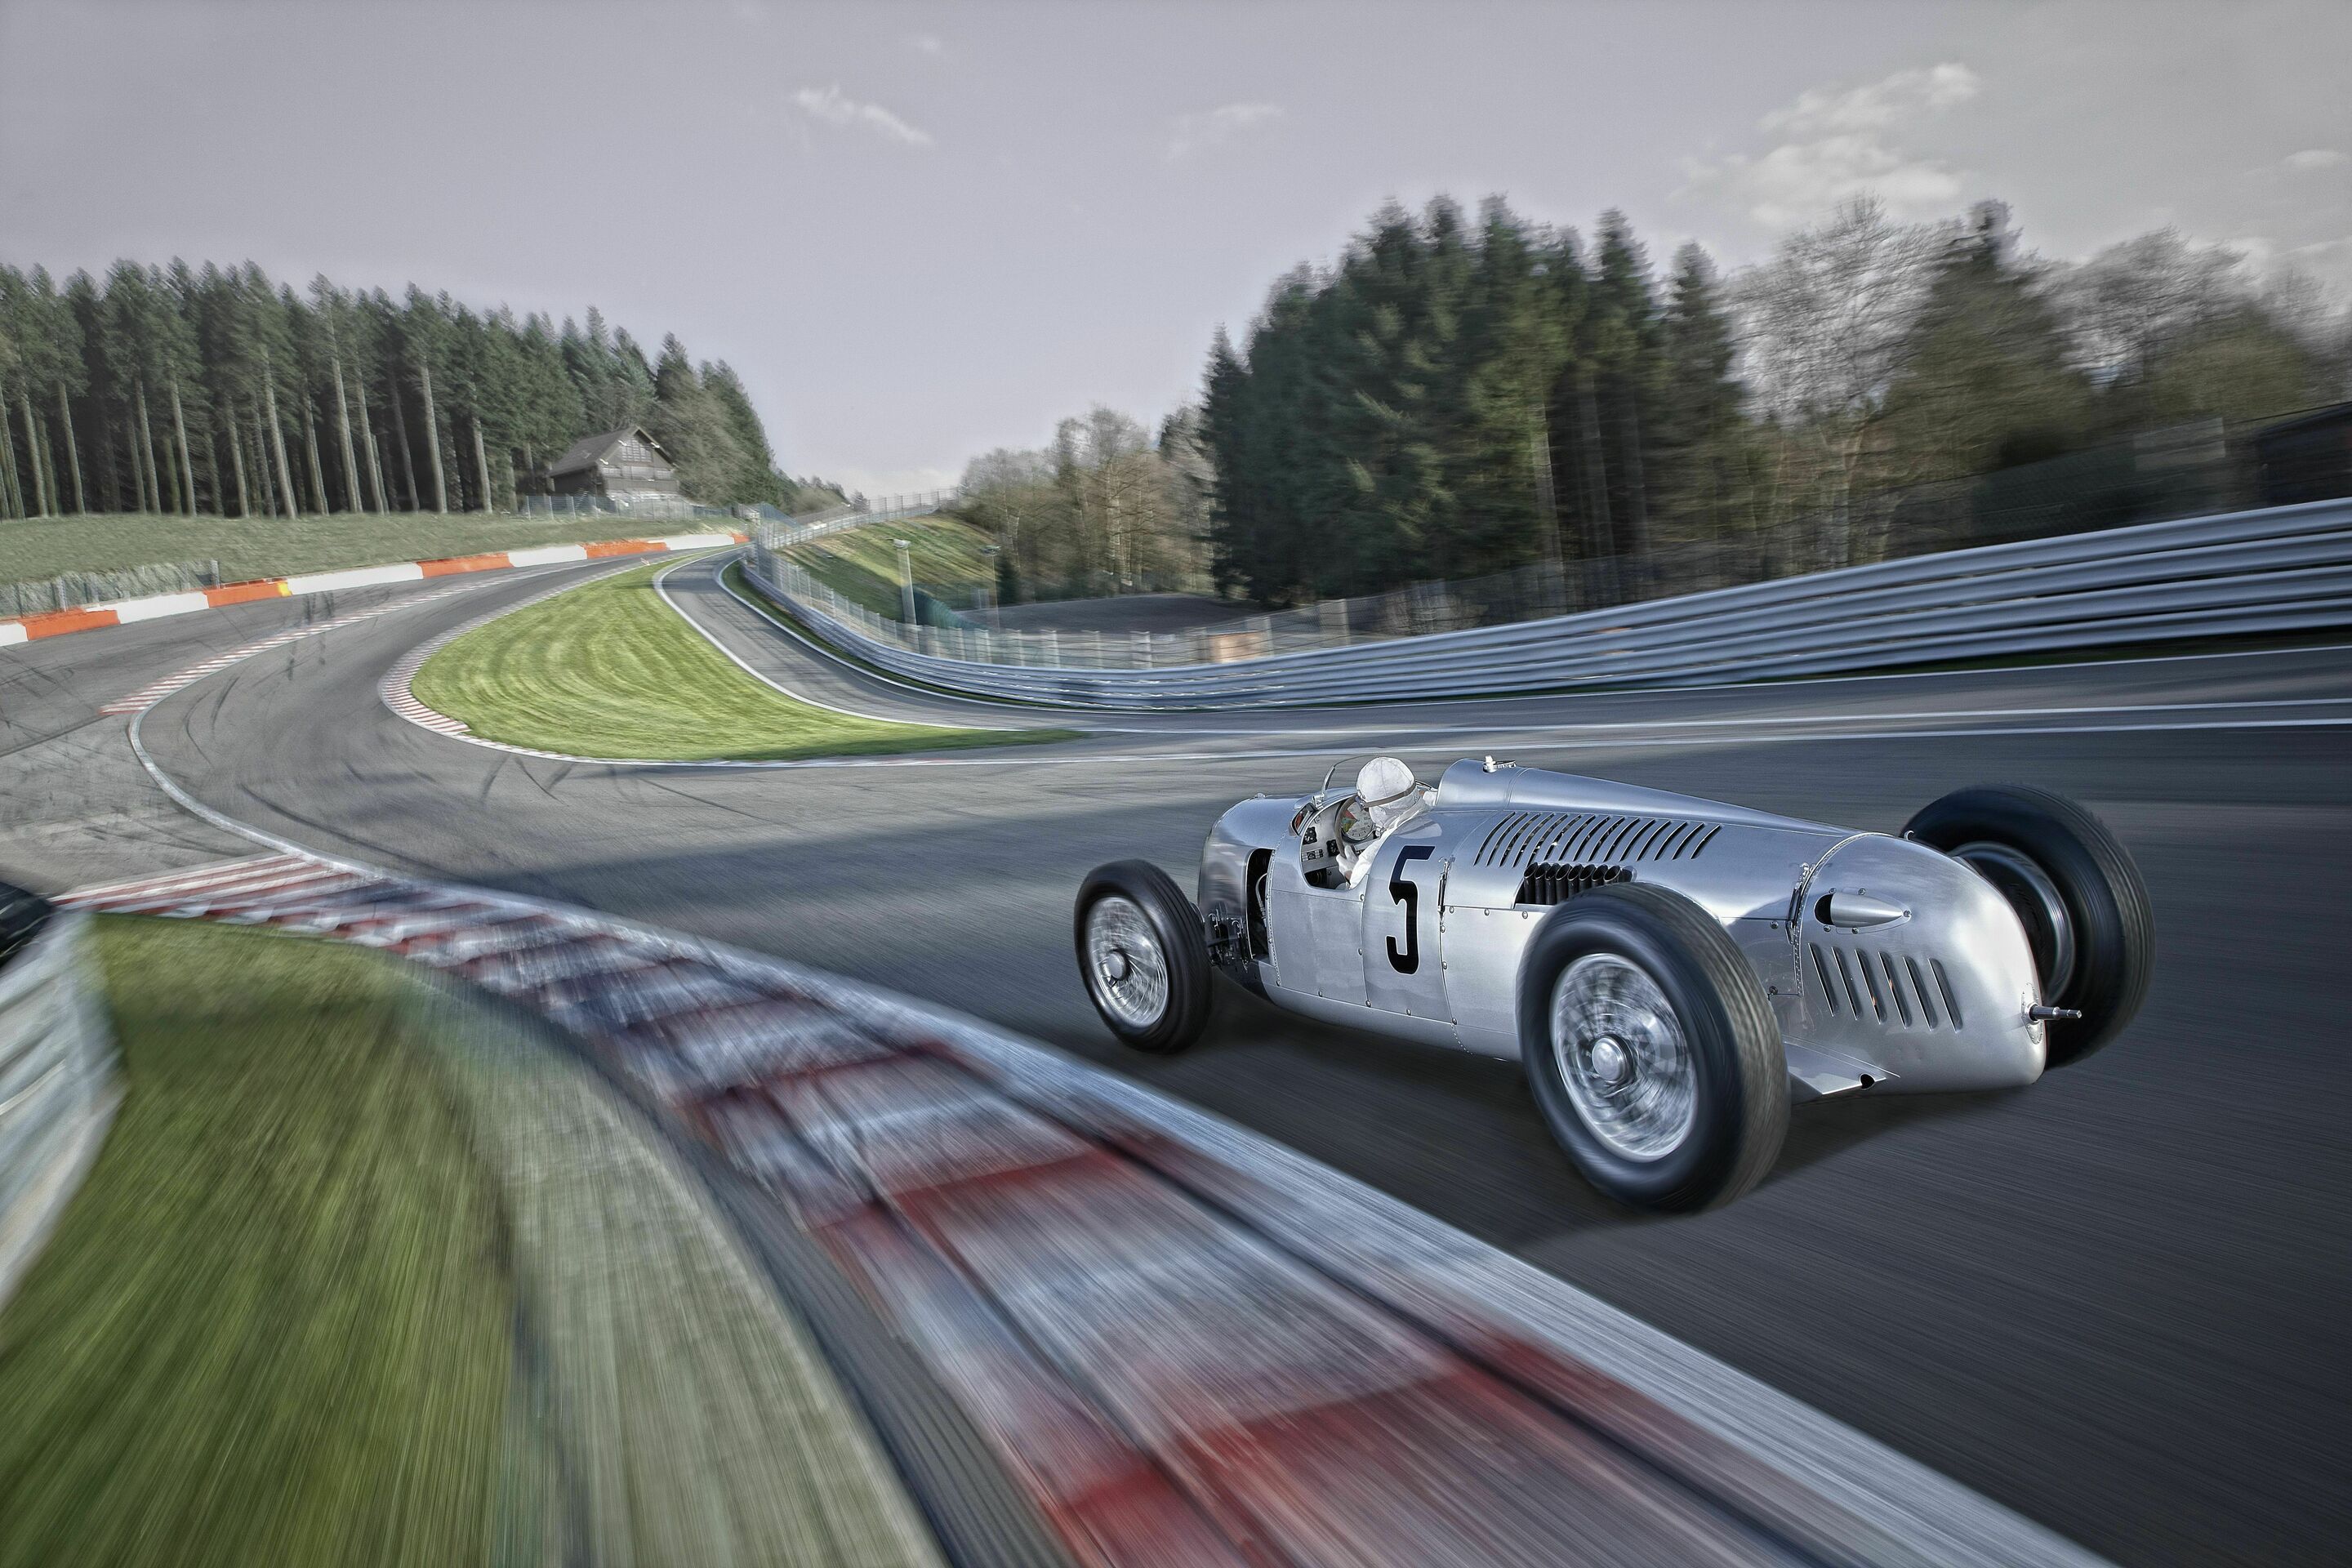 Audi Tradition is retrieving treasures from motorsports history from its hallowed halls